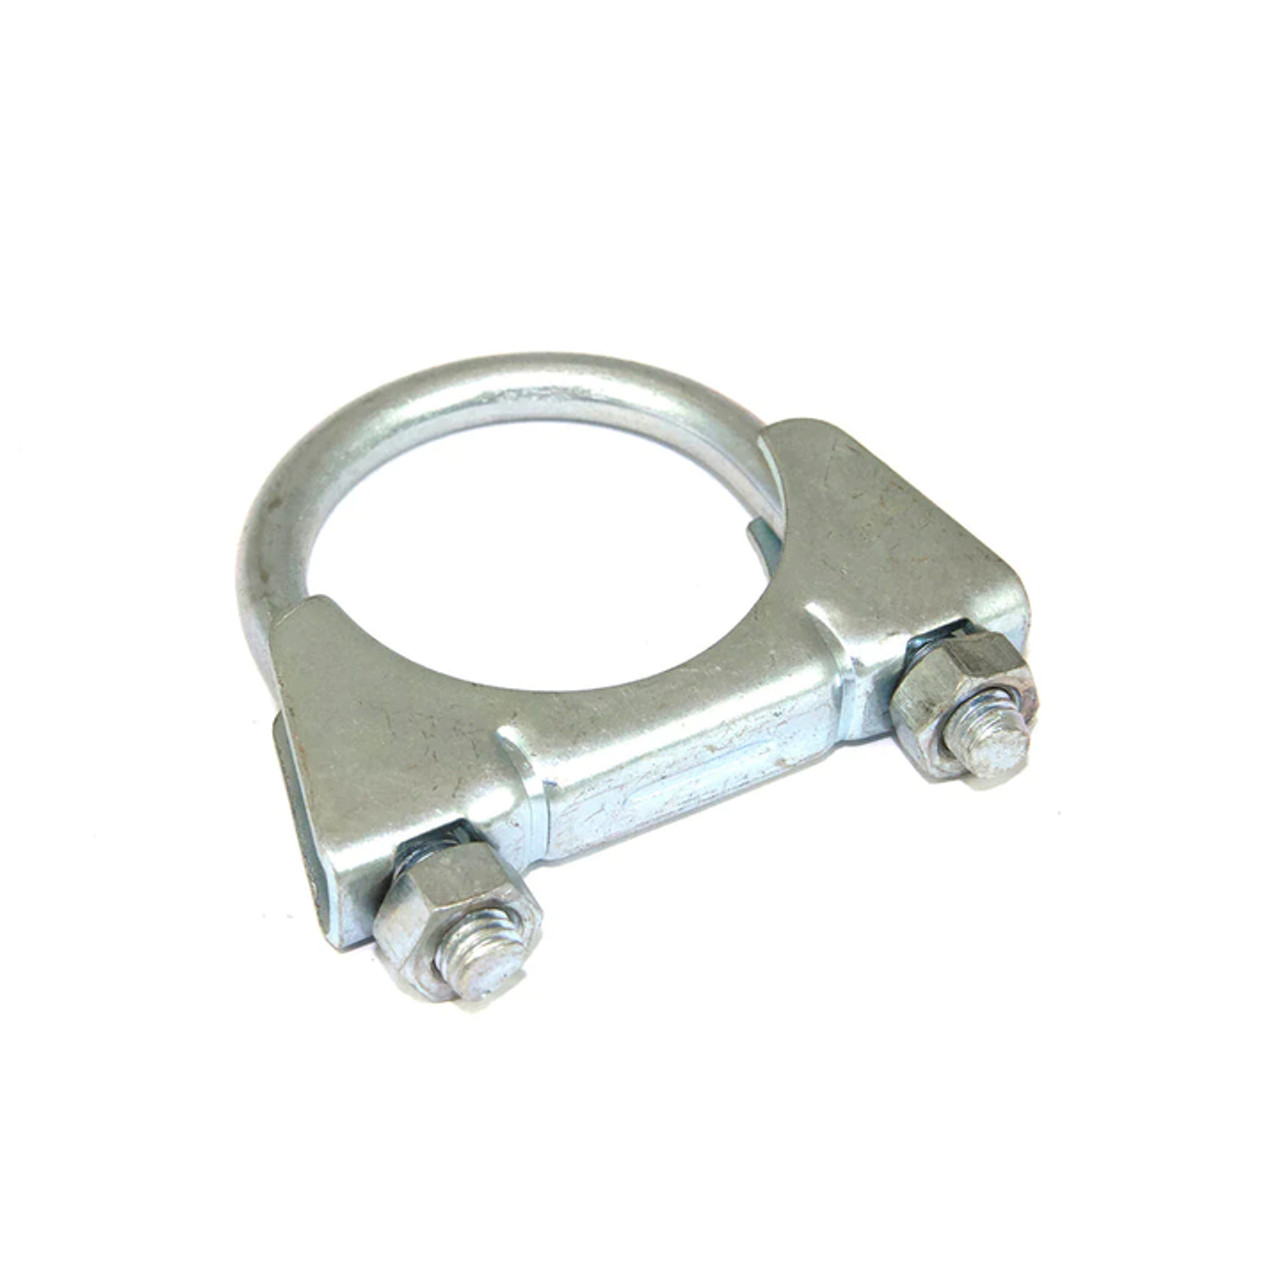 EXHAUST CLAMP PLATED -SIZE 45MM (1 3/4")